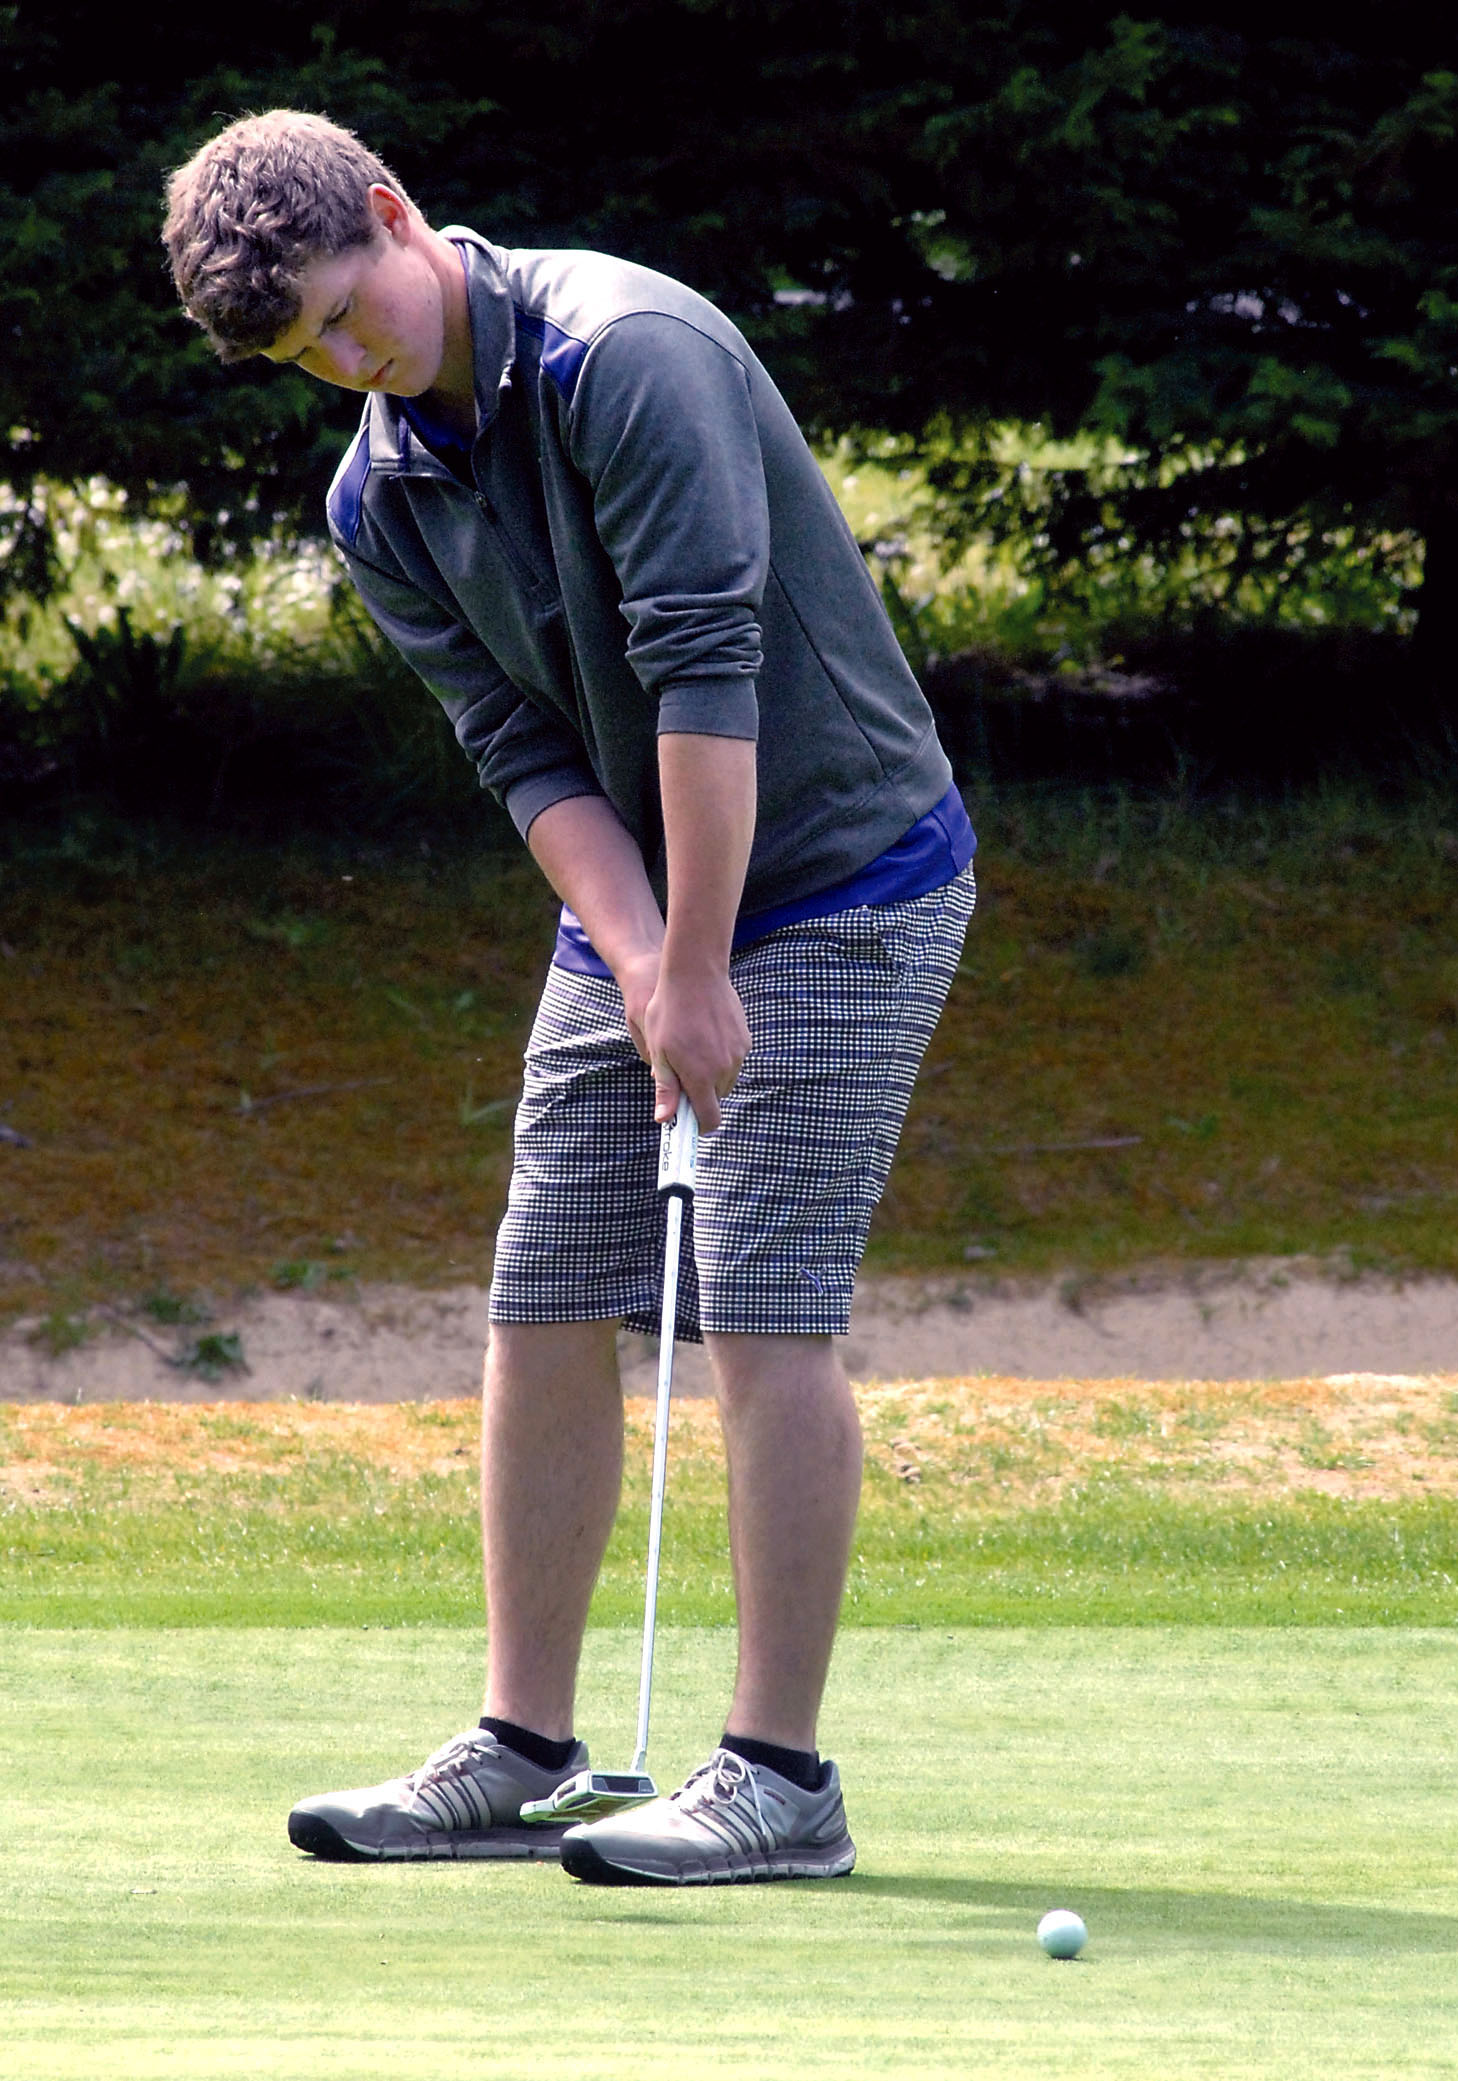 Jack Shea of Sequim putts during the Duke Streeter Invitational at Peninsula Golf Club in Port Angeles earlier this month. Shea begins the Class 2A state tournament at 7:30 a.m. today at Liberty Lake Golf Course. (Keith Thorpe/Peninsula Daily News)